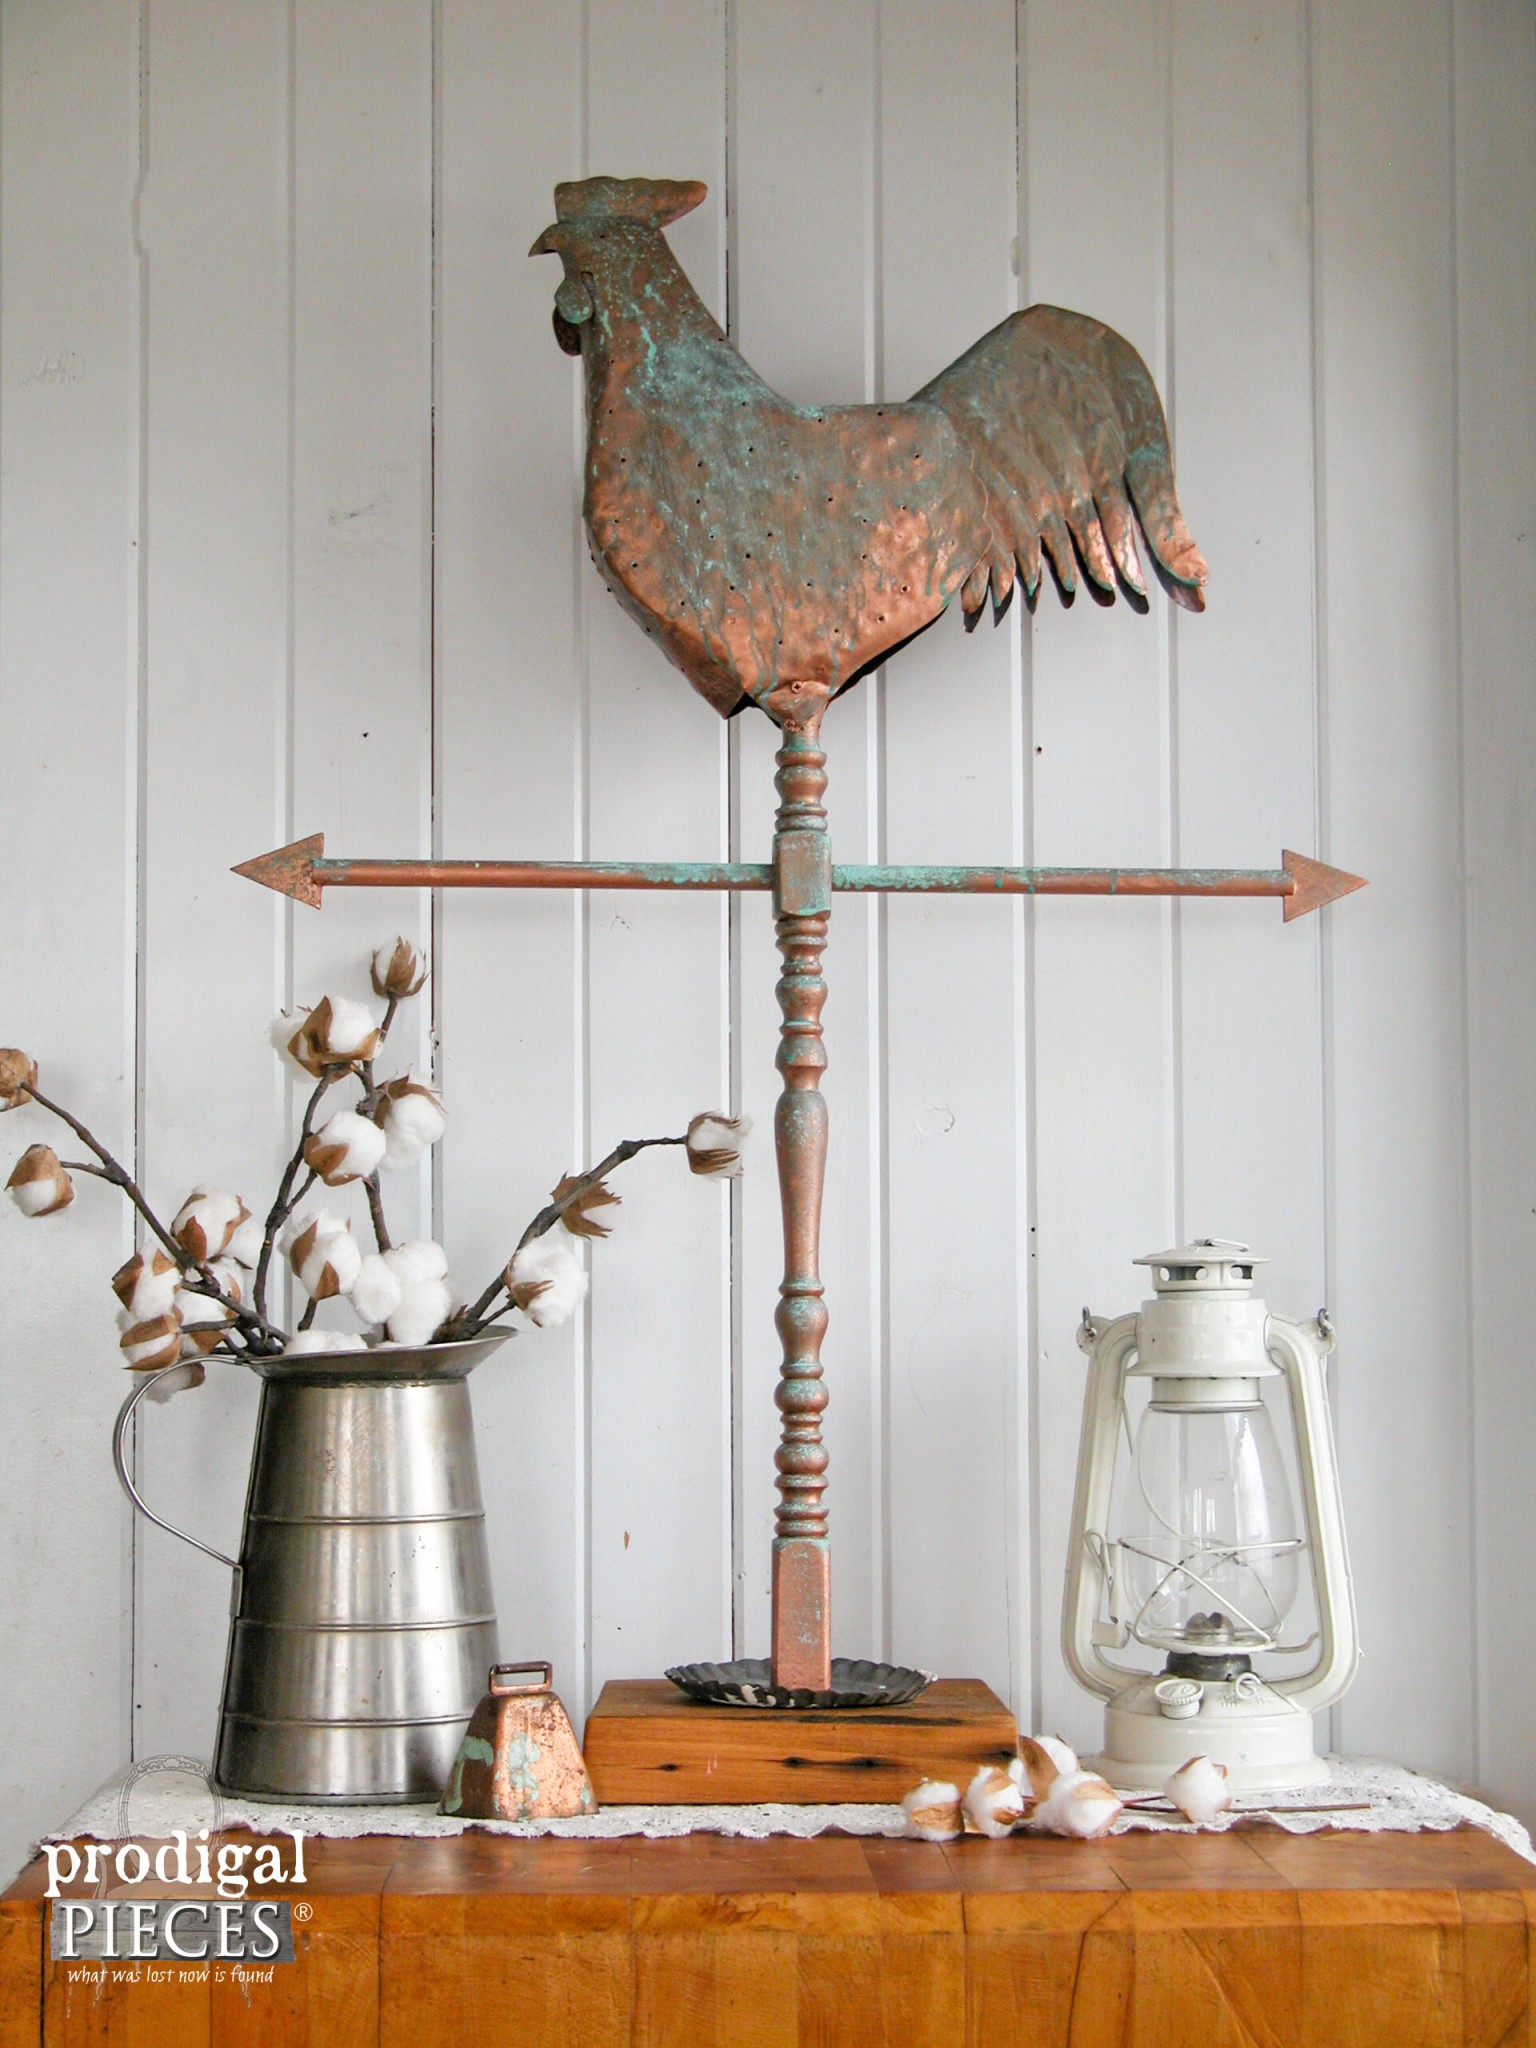 Faux Copper Weather Vane from Reclaimed Parts by Prodigal Pieces | www.prodigalpieces.com